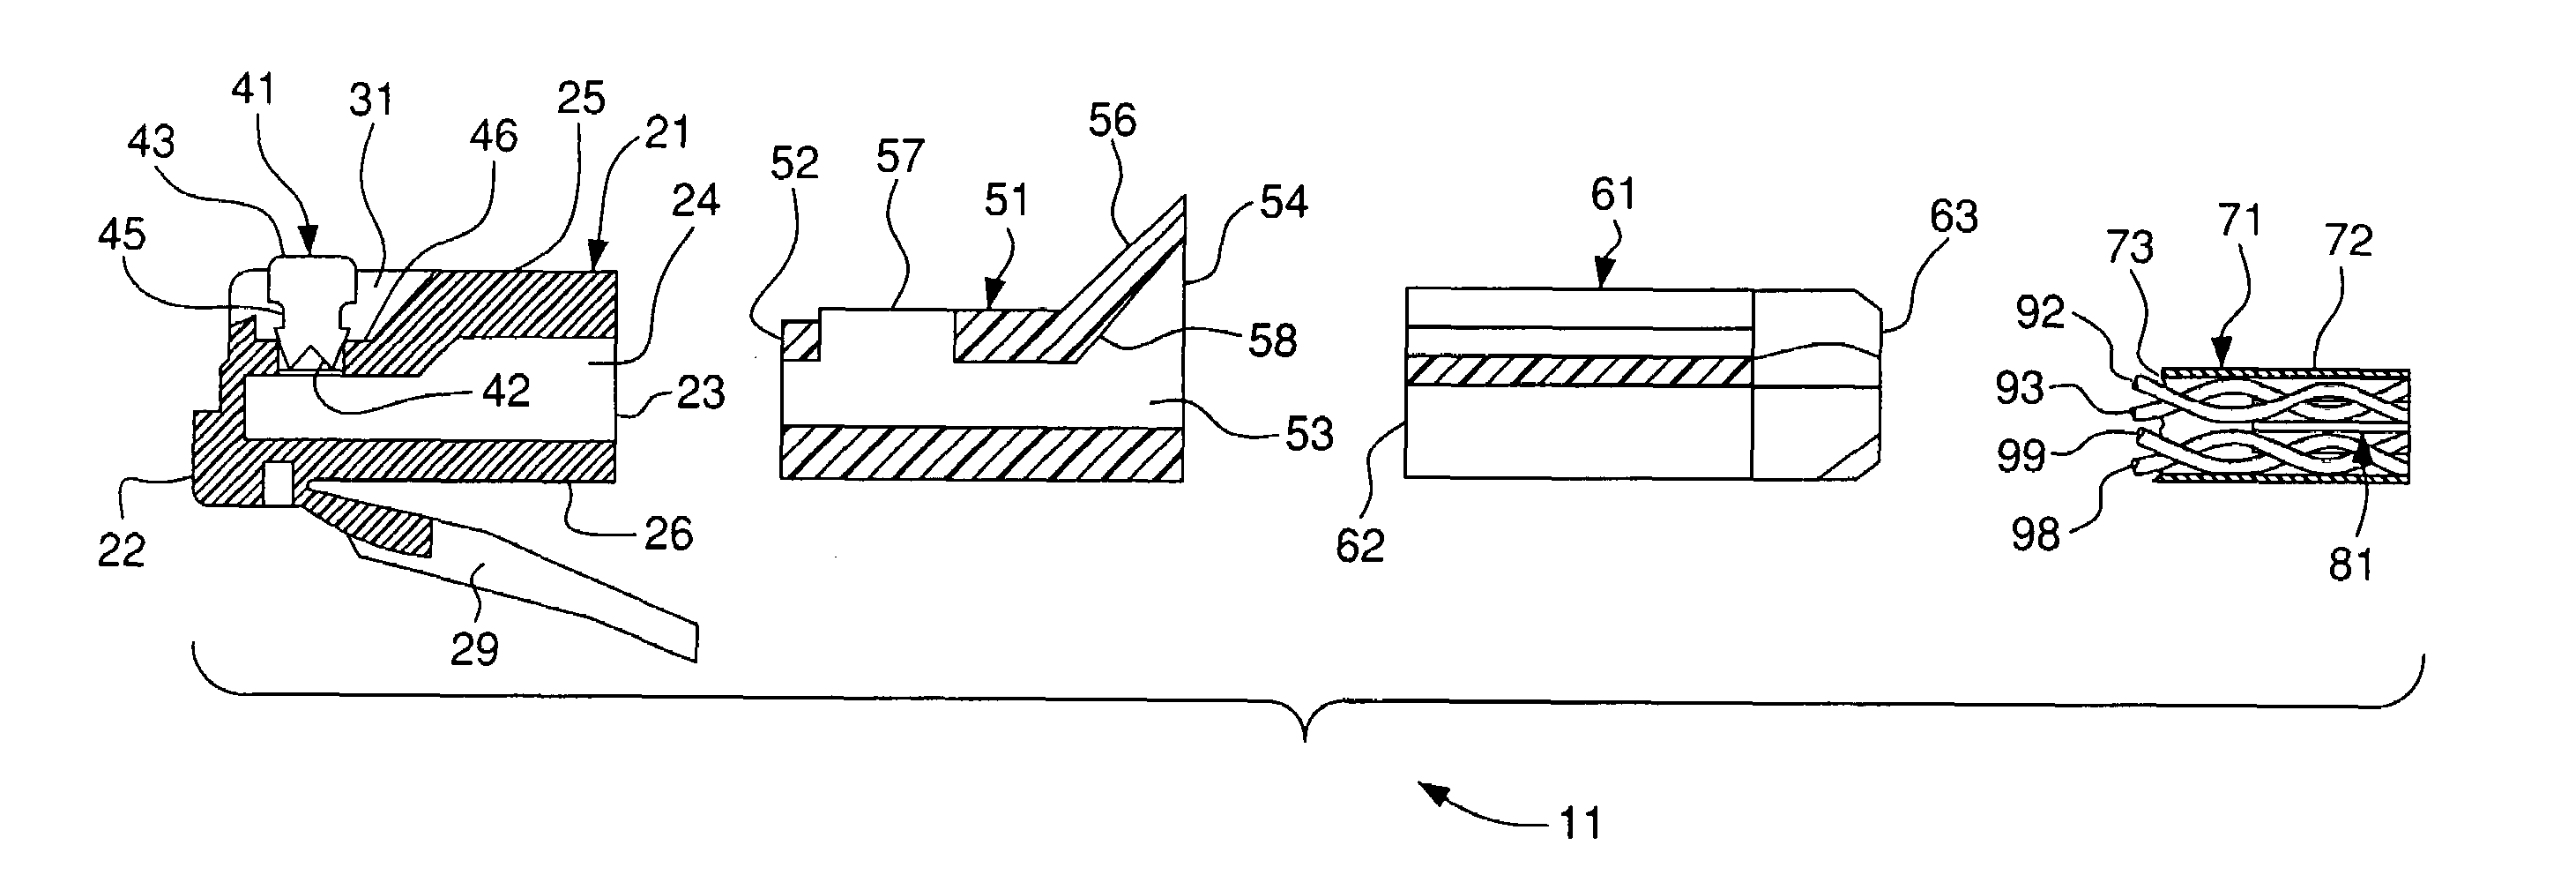 Dielectric insert assembly for a communication connector to optimize crosstalk